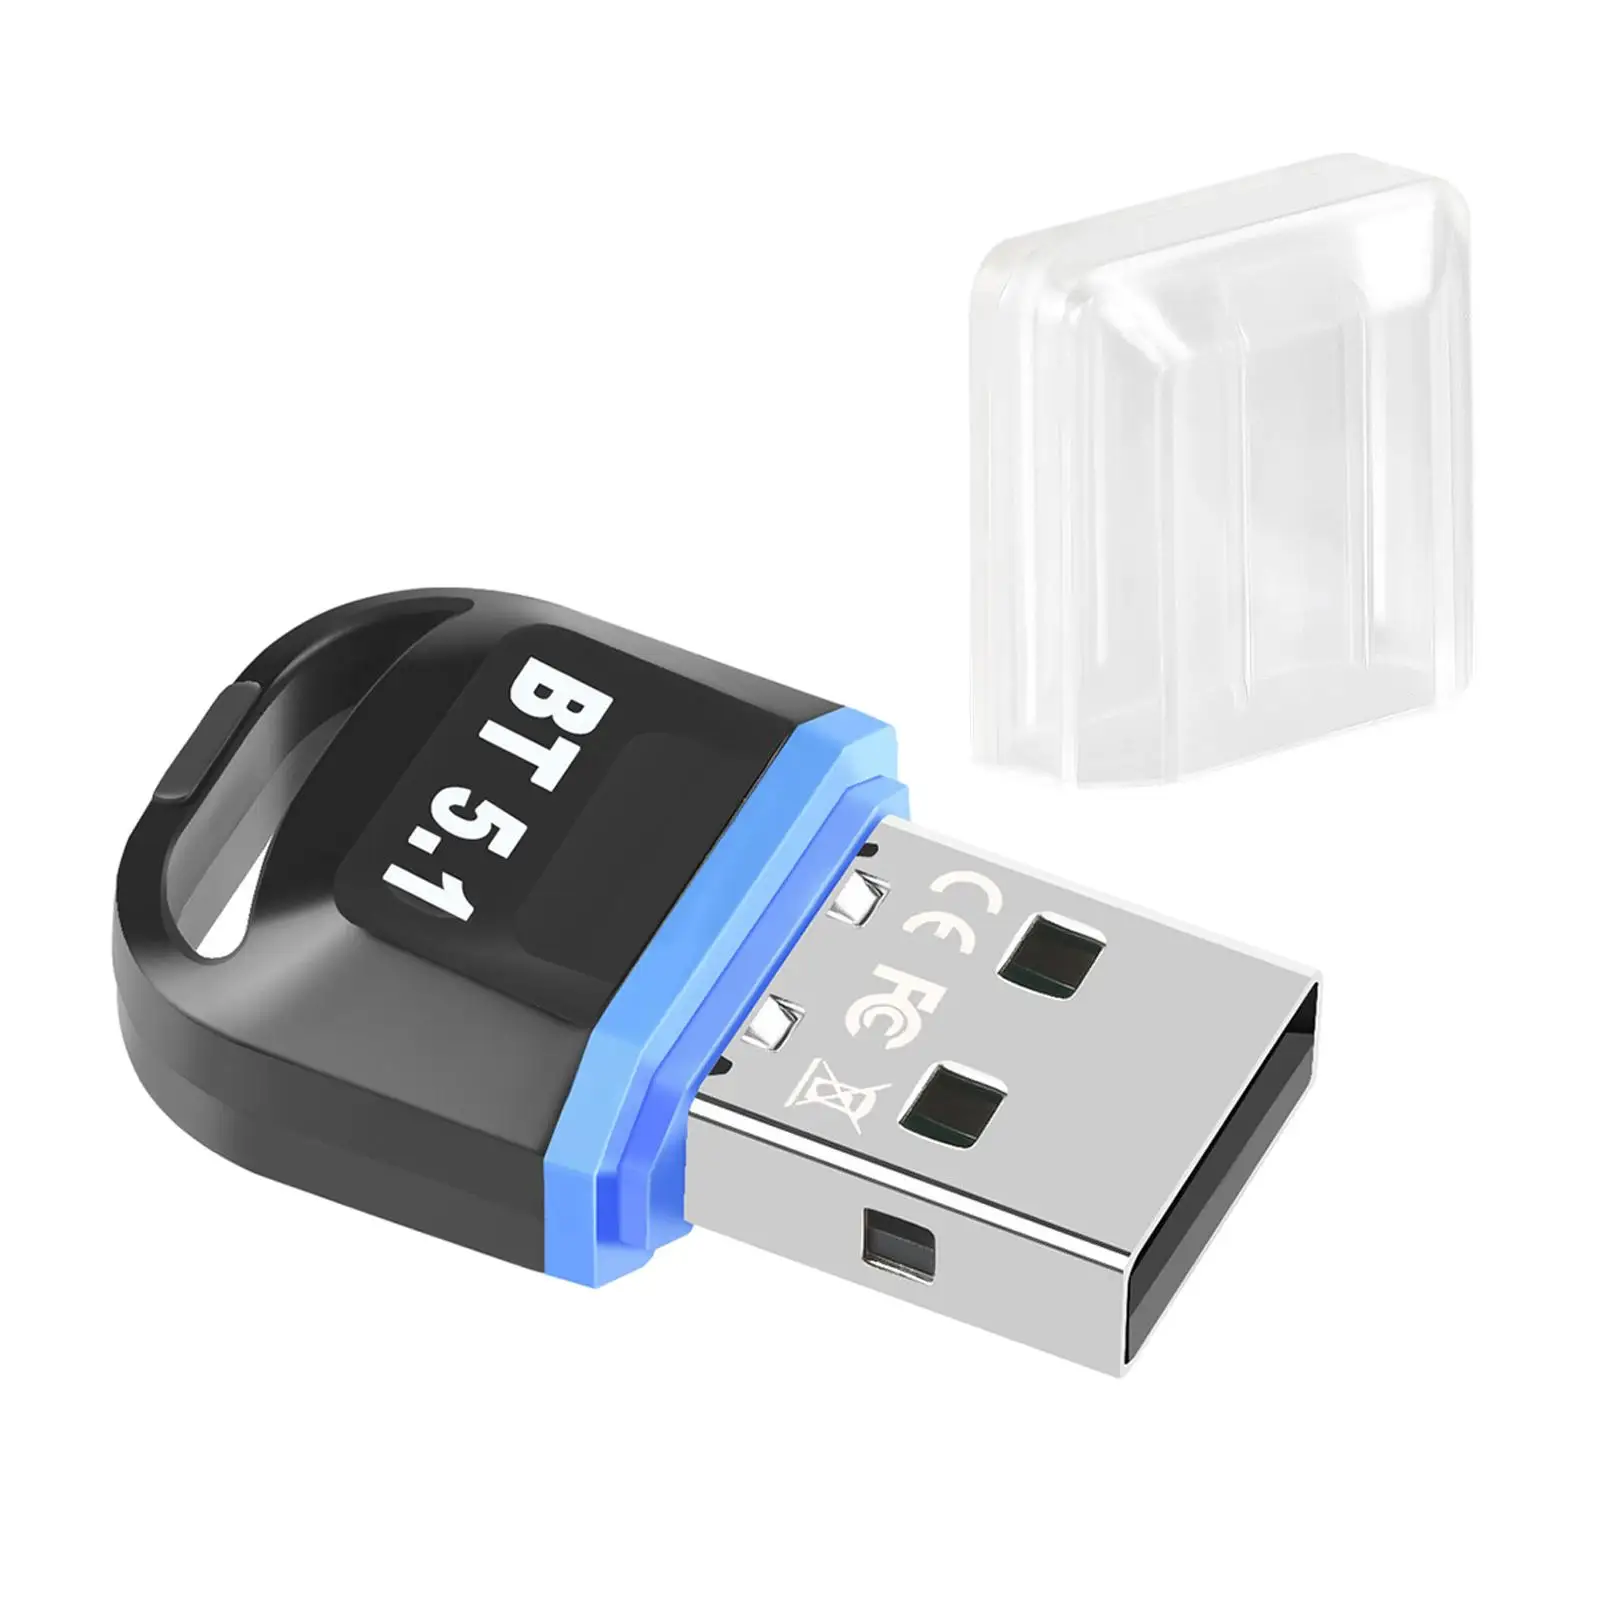 Low Latency Audio Transmitter Receiver Version 5.1 Portable Mini USB Adapter for Computers Home Stereo System Mice Printers TV